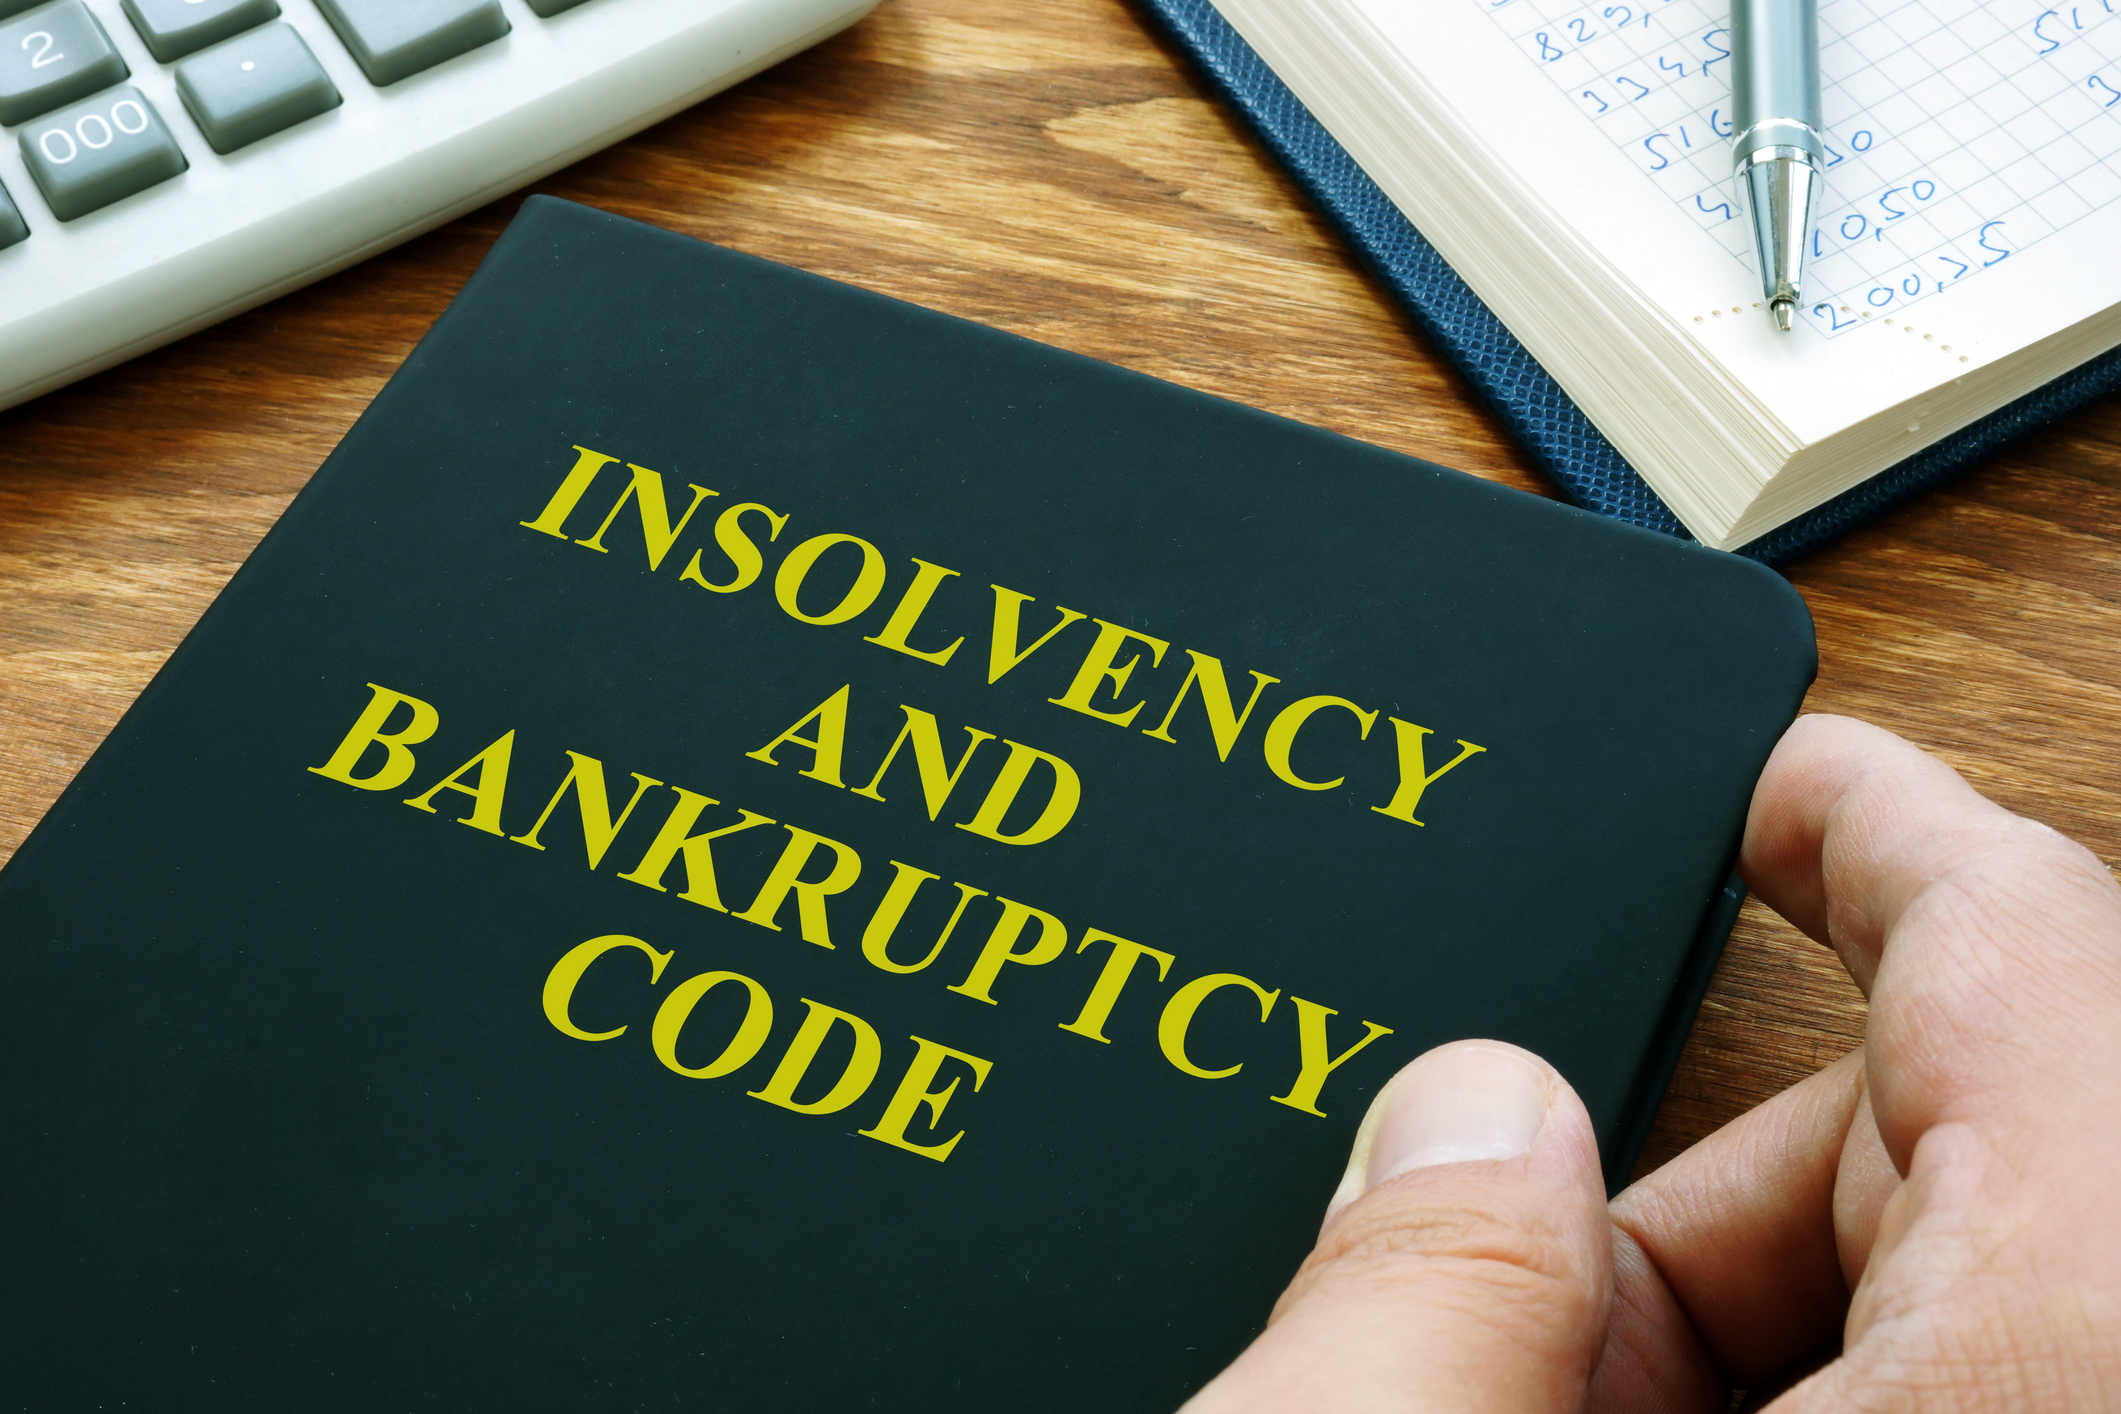 India looks to further reforms of the bankruptcy code